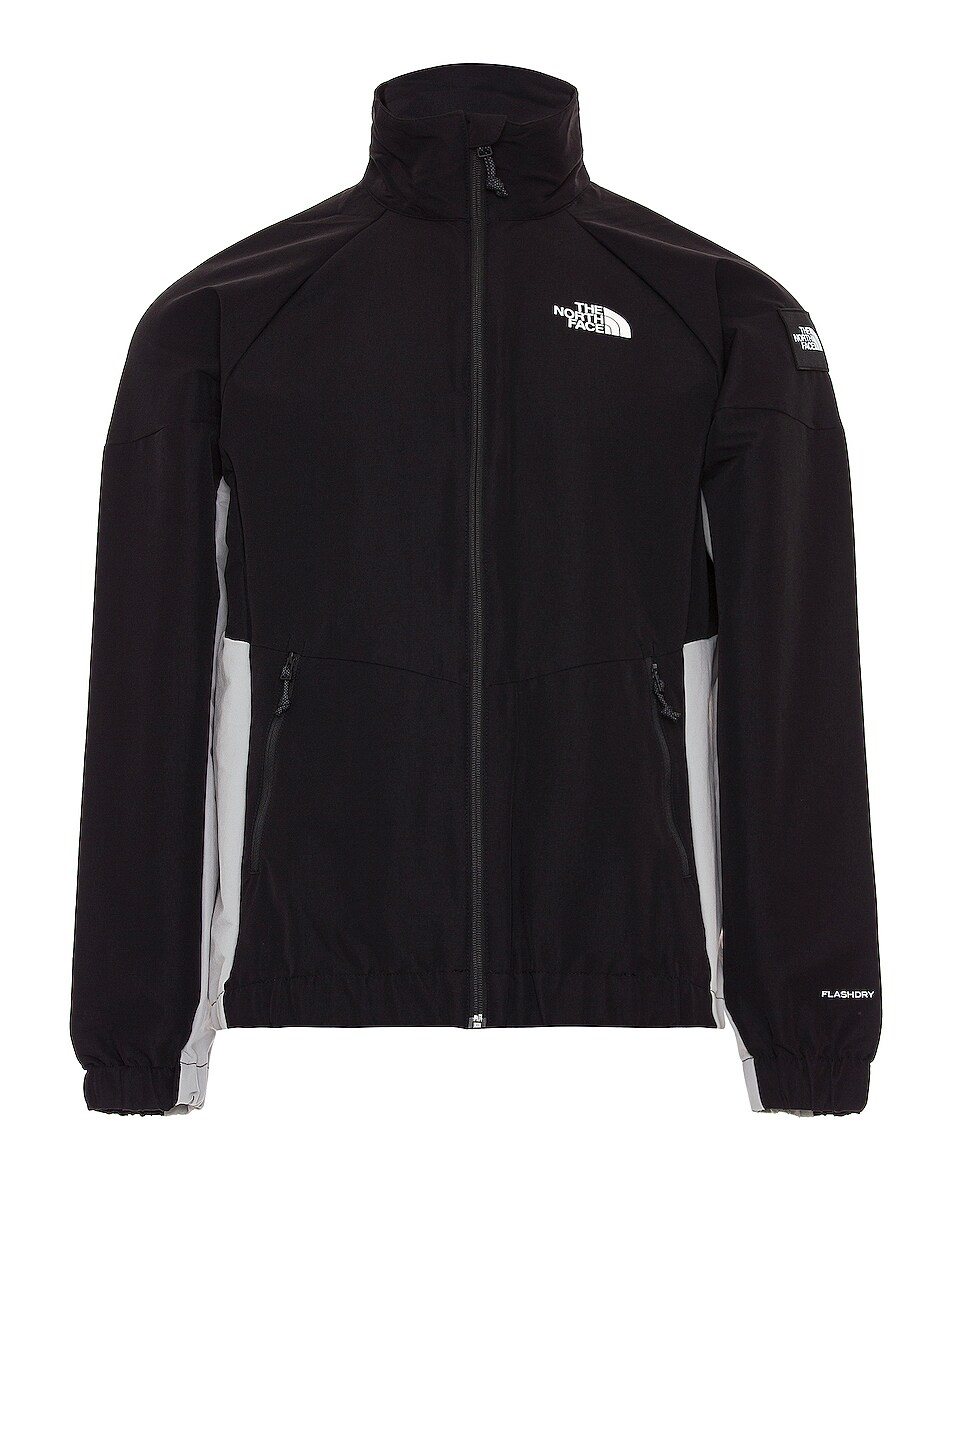 Image 1 of The North Face Phlego Track Top in Black & Meld Grey